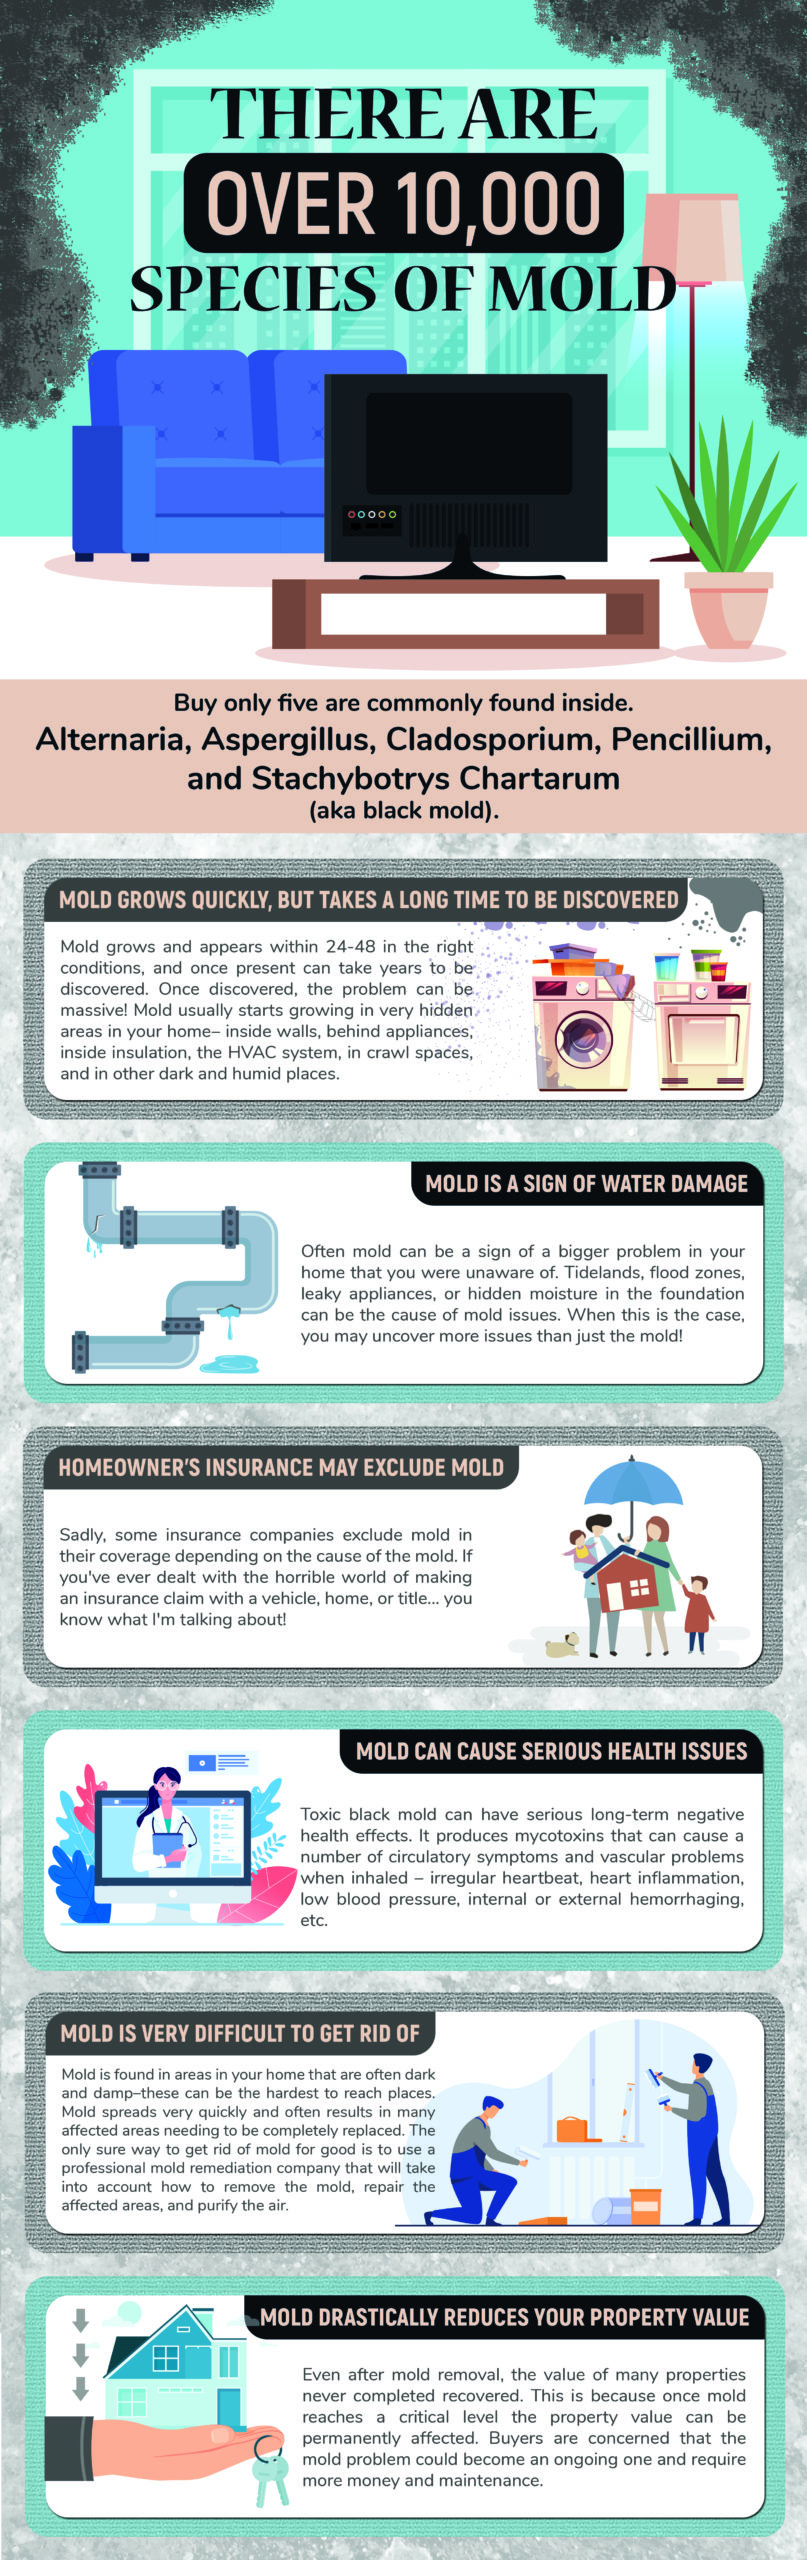 Mold infographic